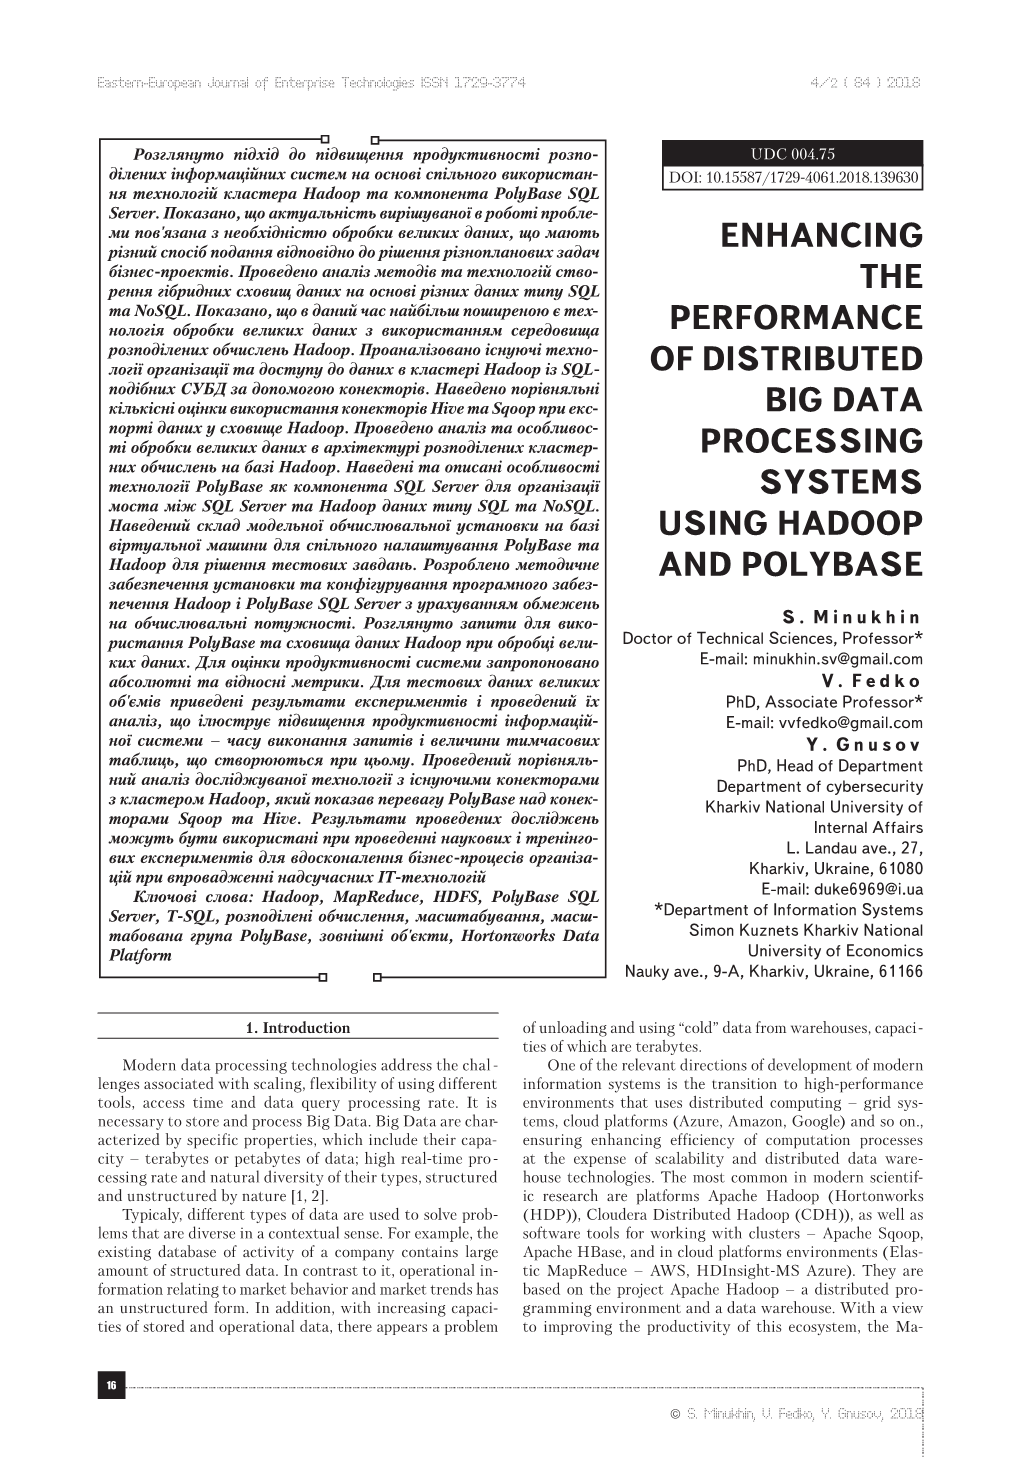 Enhancing the Performance of Distributed Big Data Processing Systems Using Hadoop and Polybase